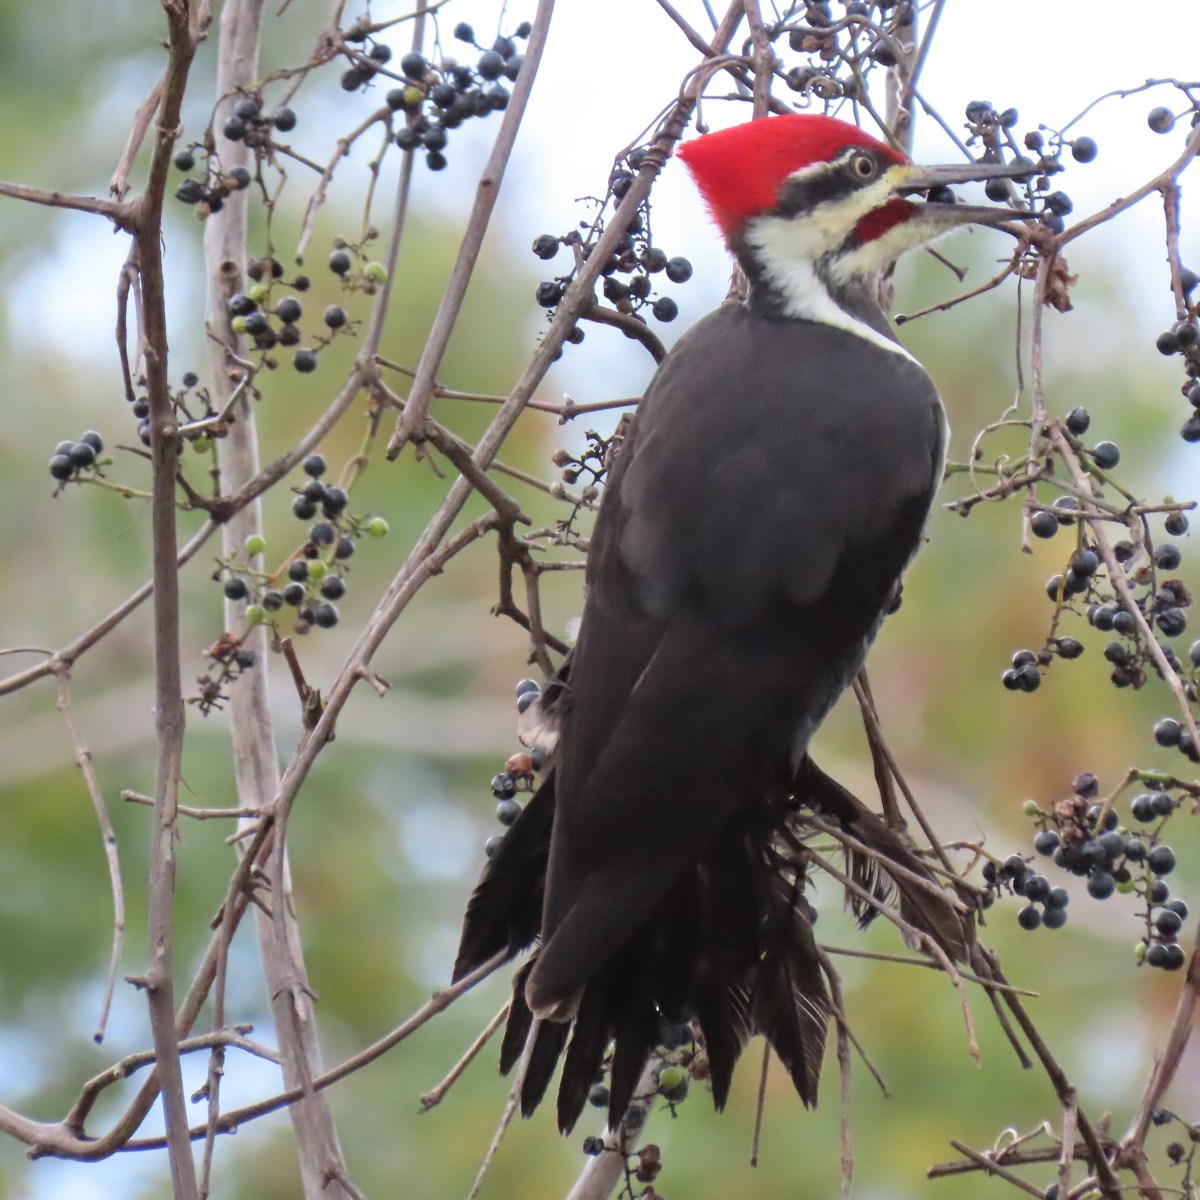 Pileated woodpecker with grape in mouth